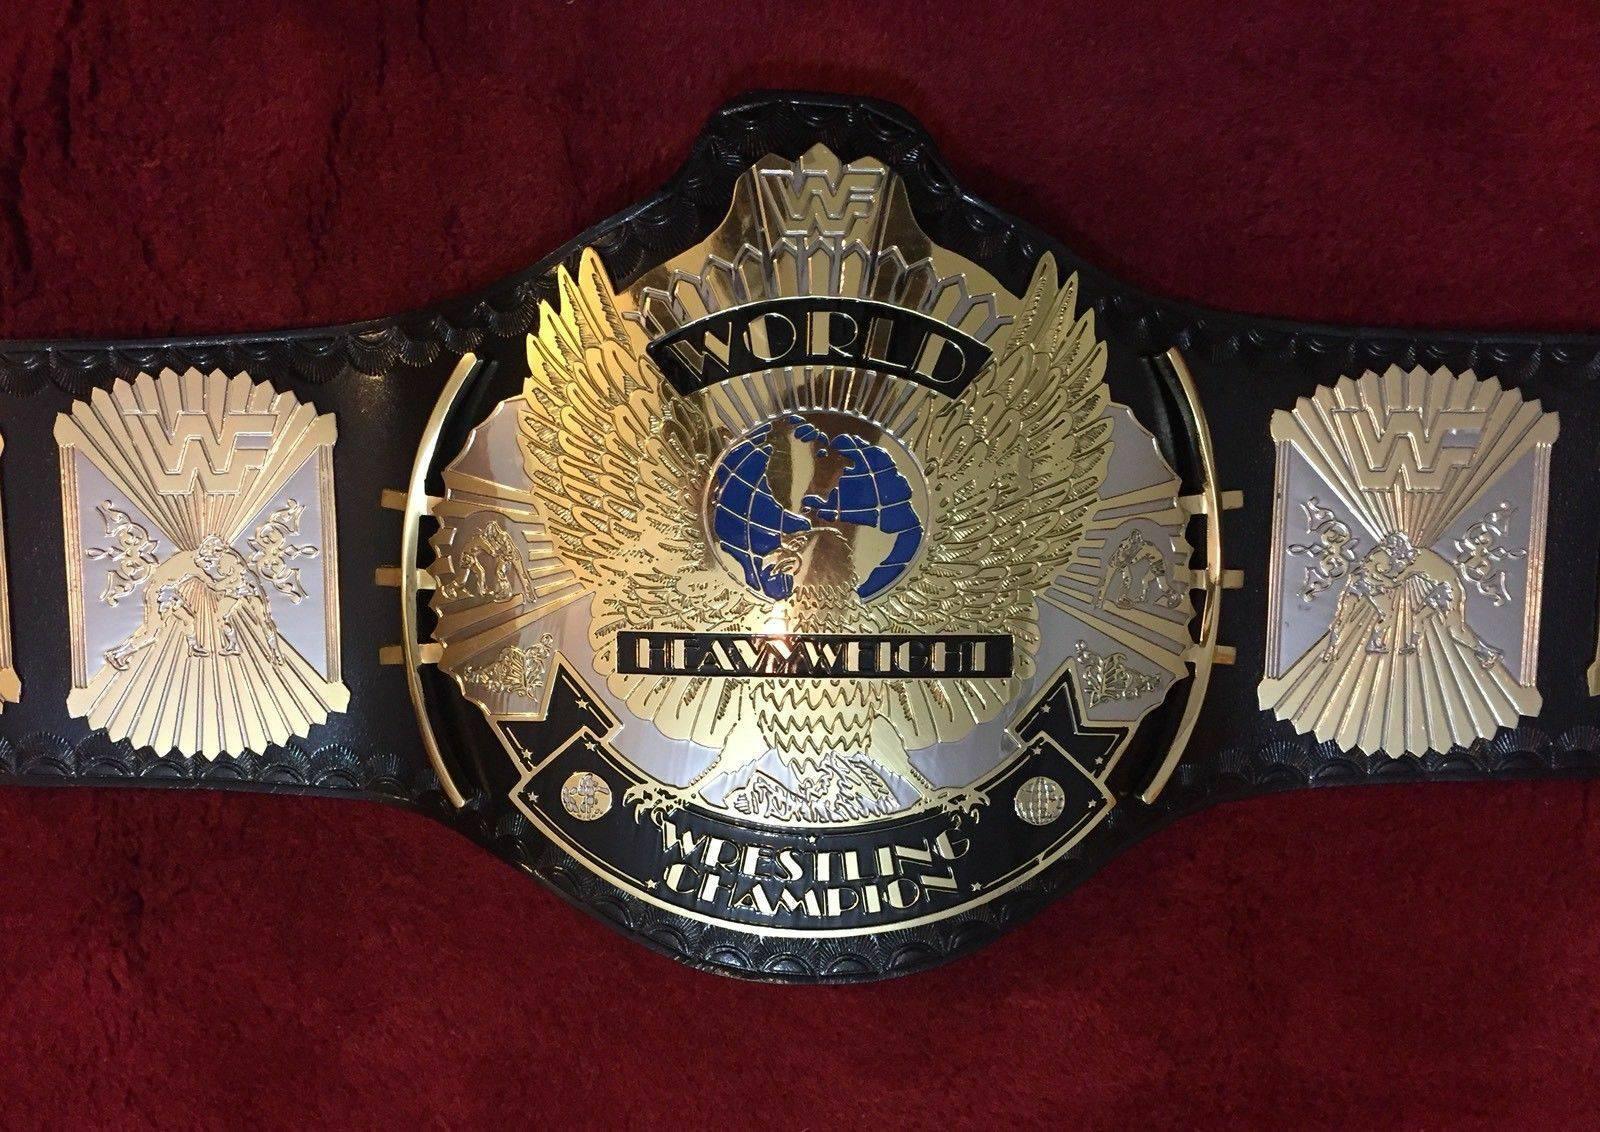 WWF WINGED EAGLE DUAL PLATED Brass Championship Belt